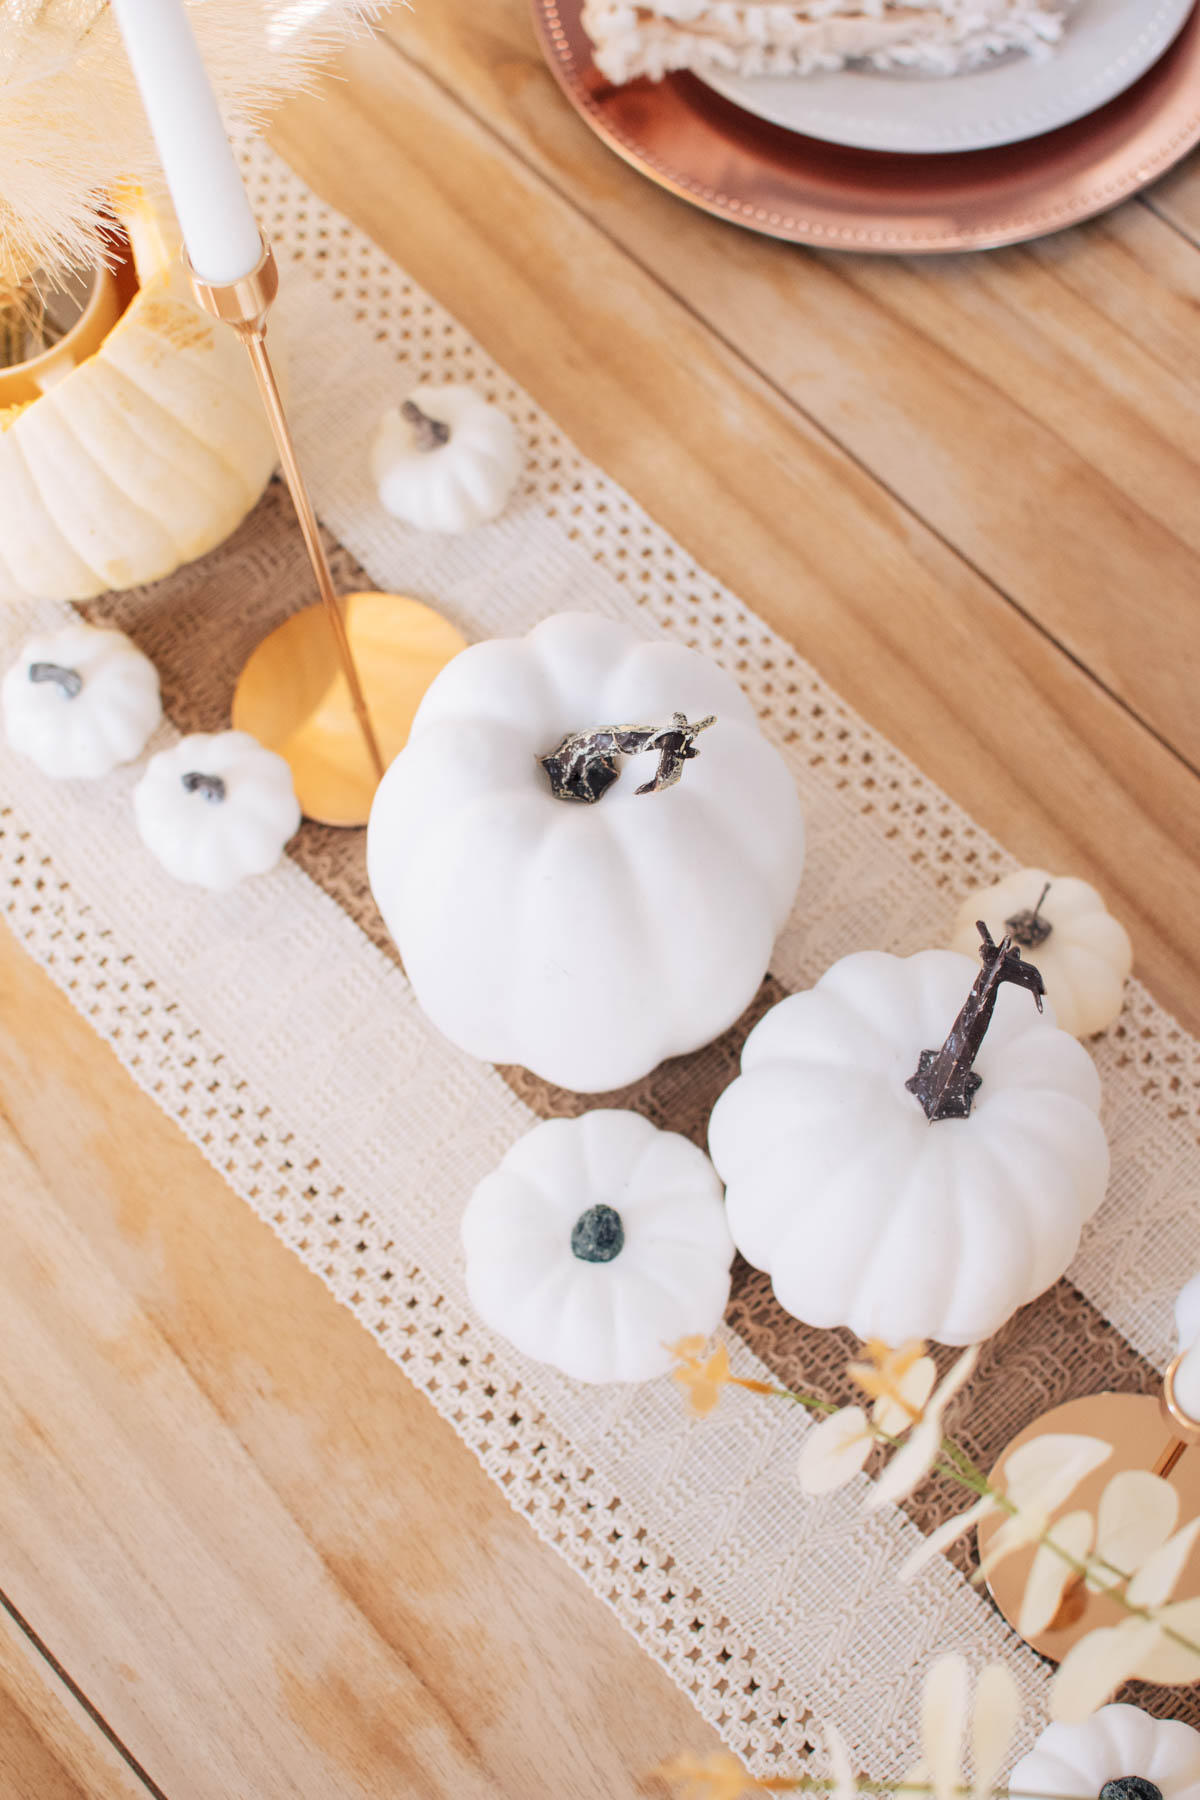 Thanksgiving table decor from Amazon including white pumpkins, table runner, and candle stick.